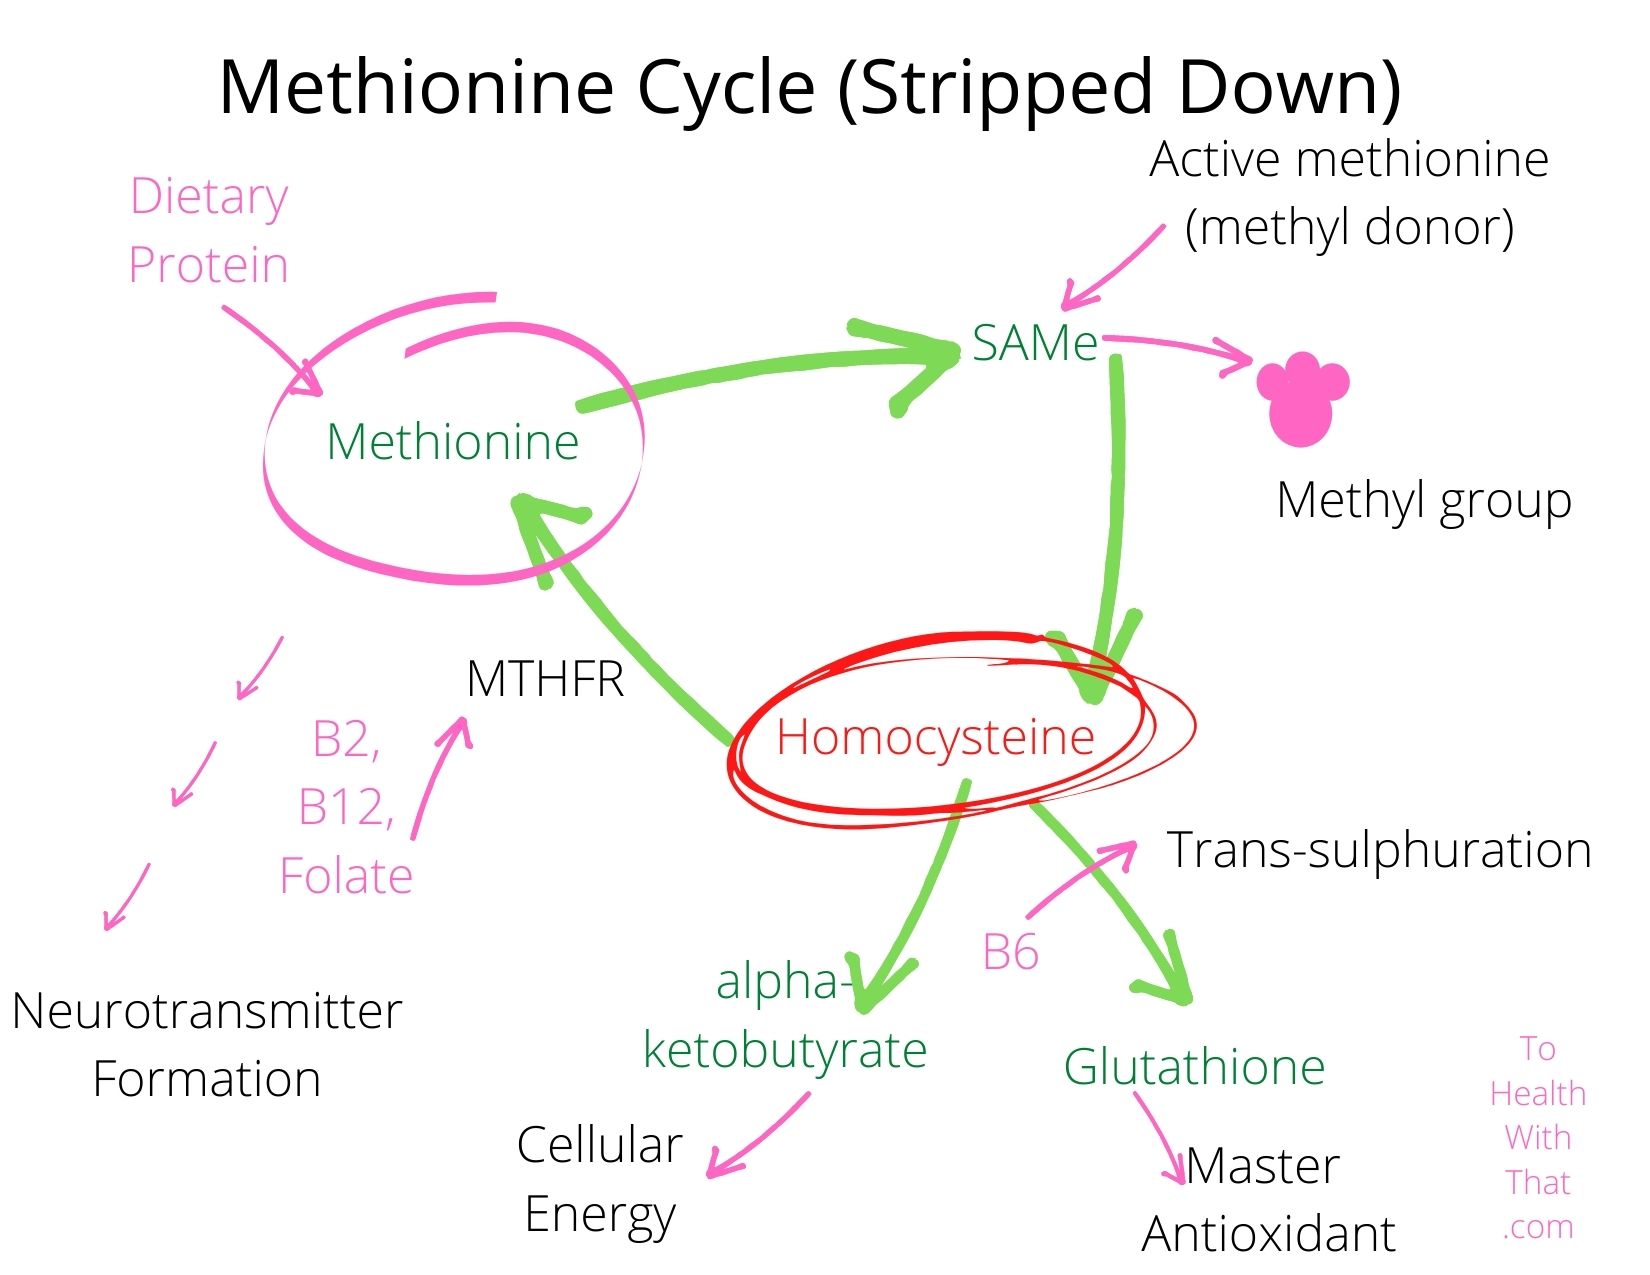 MTHFR and homocysteine are linked through the methionine cycle